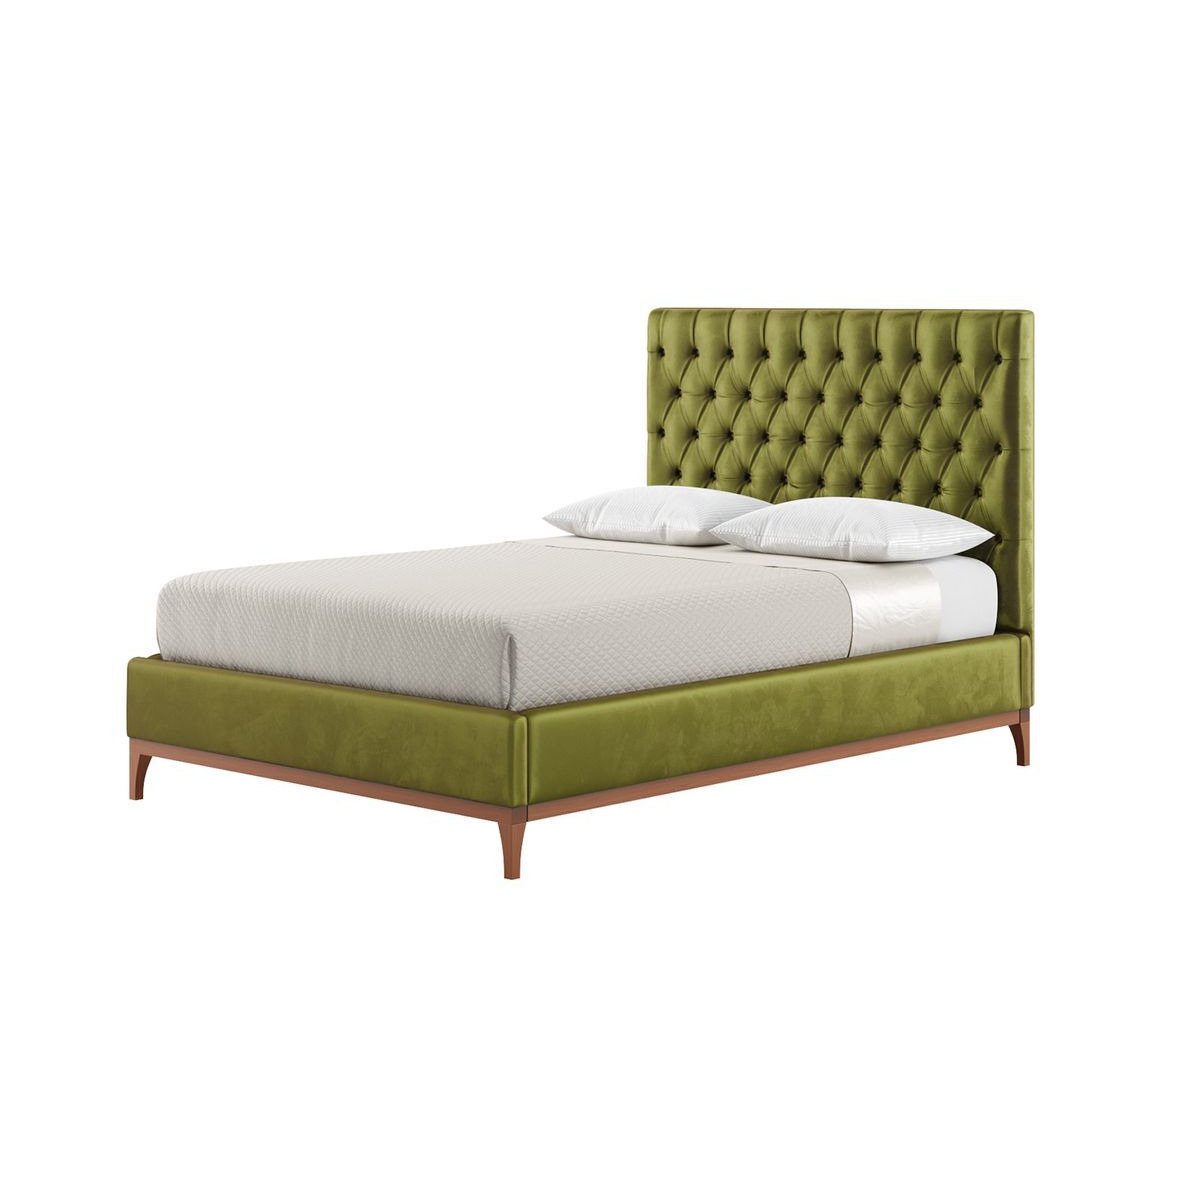 Marlon 4ft6 Double Bed Frame with luxury deep button quilted headboard, olive green, Leg colour: aveo - image 1